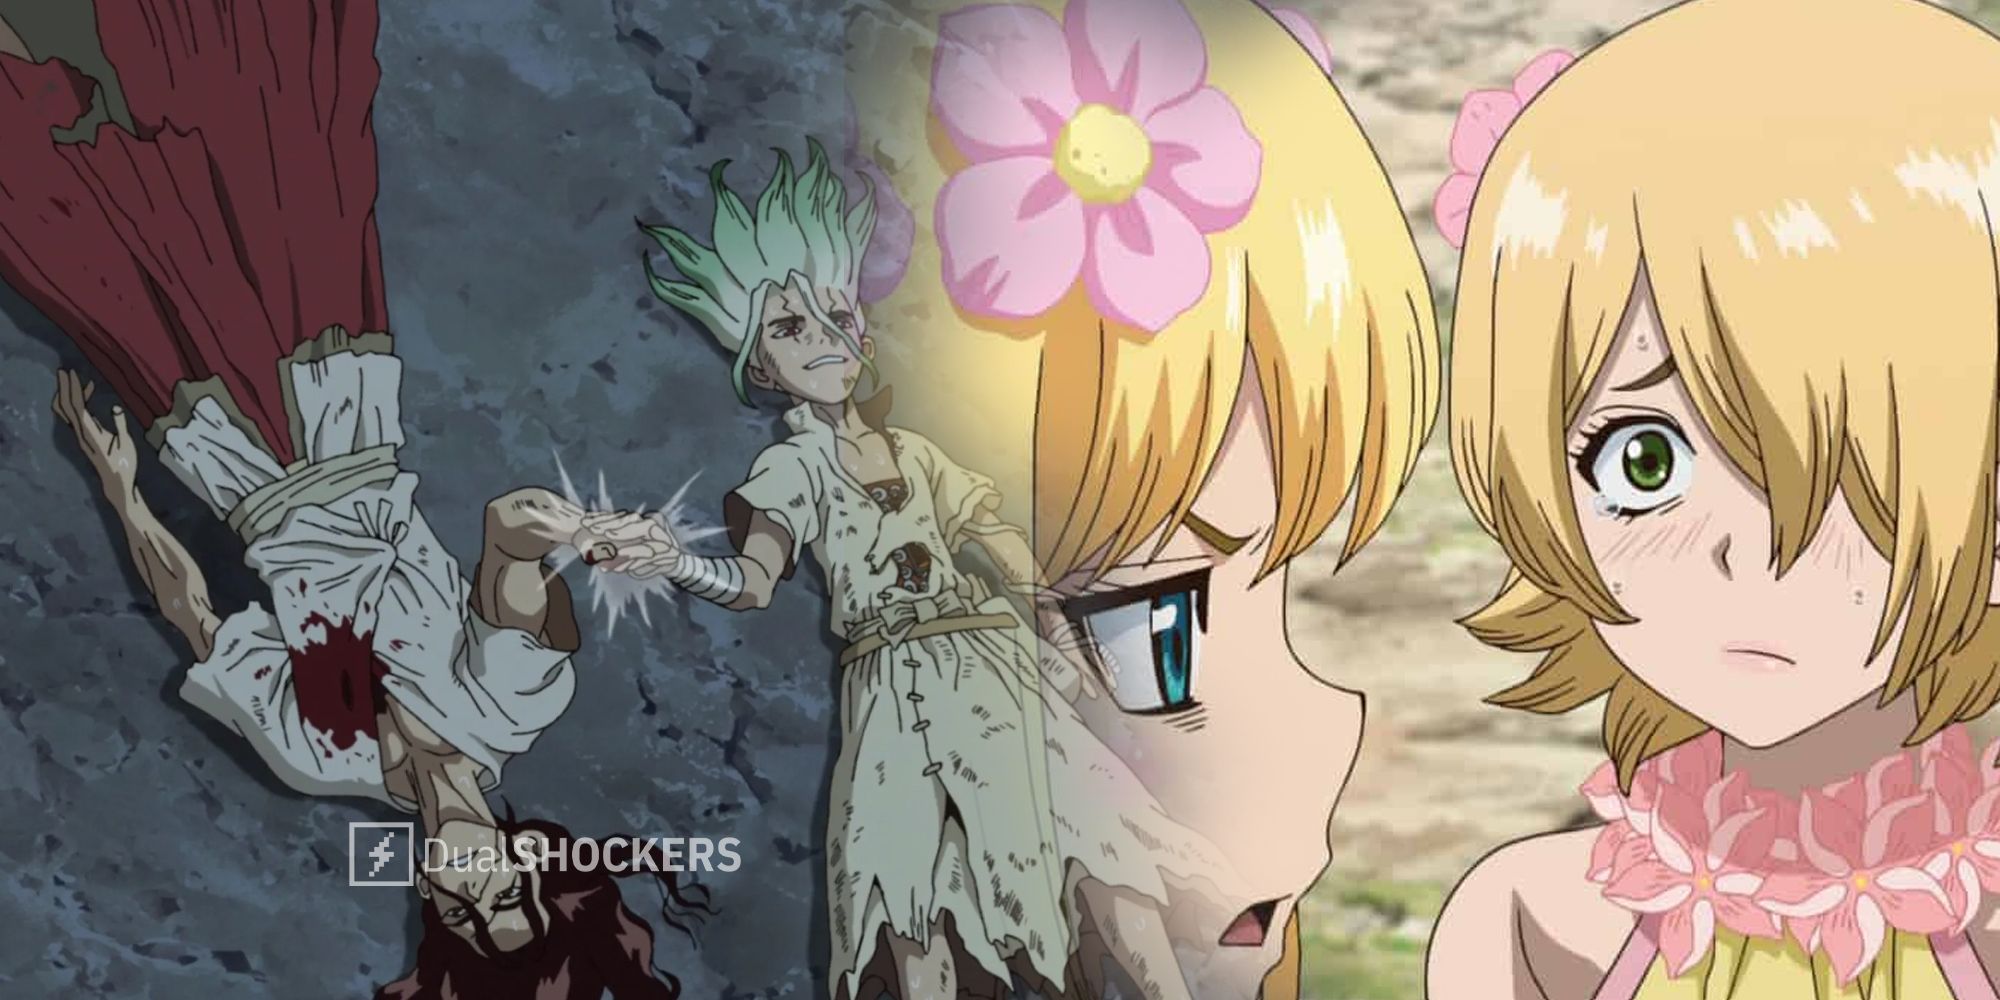 Dr Stone Season 3 Episode 10 Release Date And Time